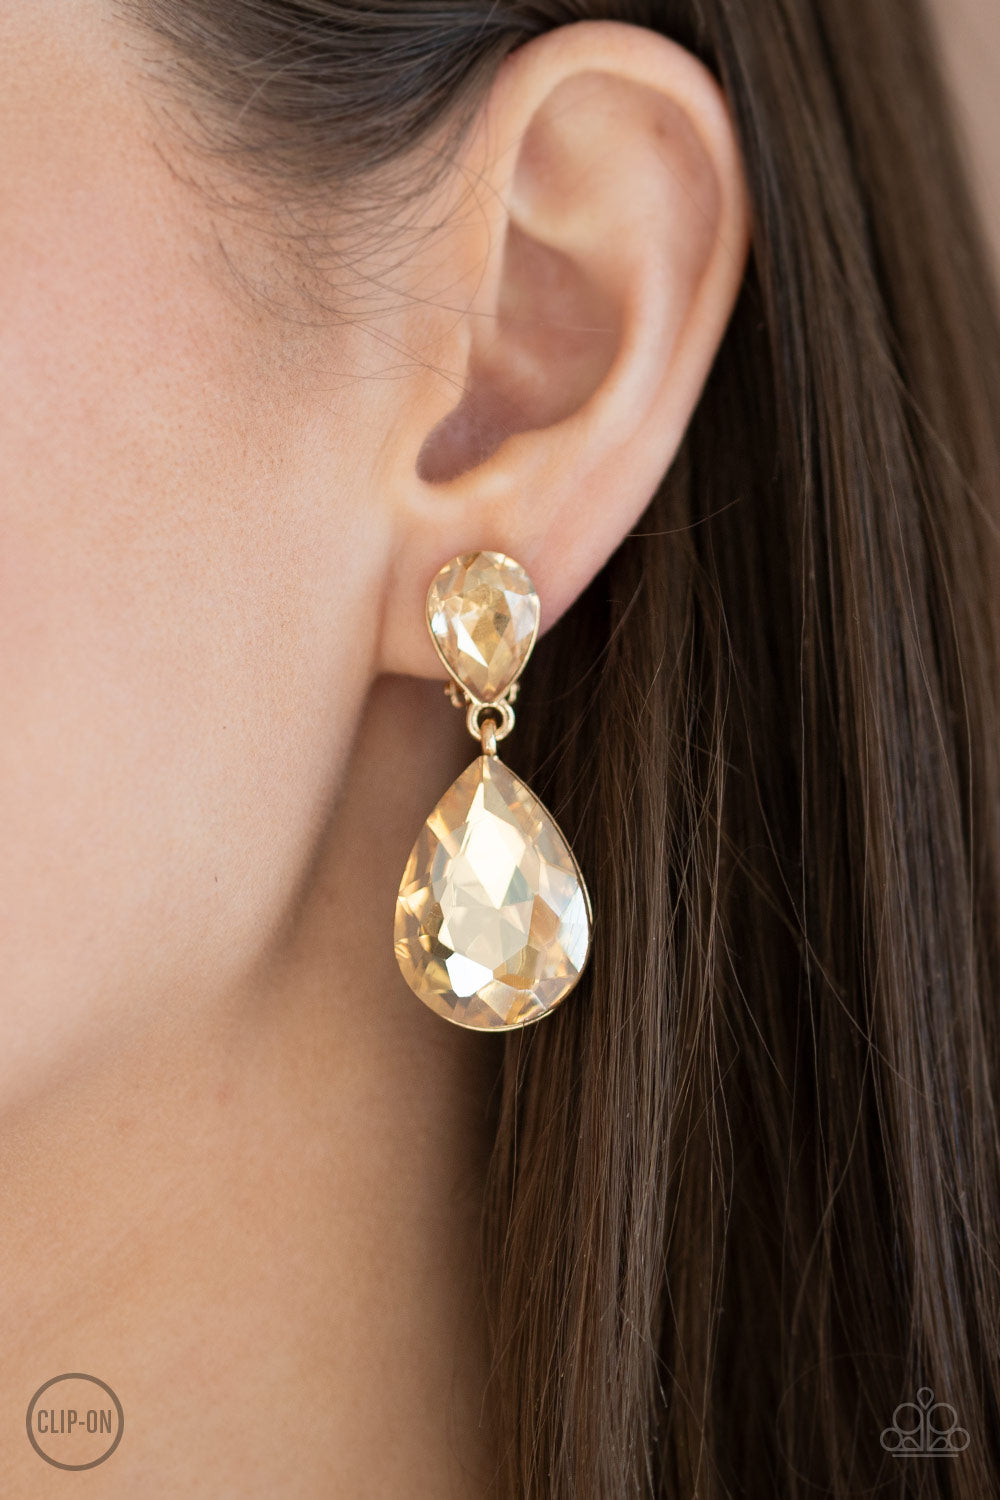 Paparazzi Accessories Aim For the MEGASTARS - Gold Clip-On Earrings dramatically oversized golden rhinestone teardrop swings from the bottom of a smaller rhinestone teardrop, linking into a glamorous lure. Earring attaches to a standard clip-on fitting.  Sold as one pair of clip-on earrings.